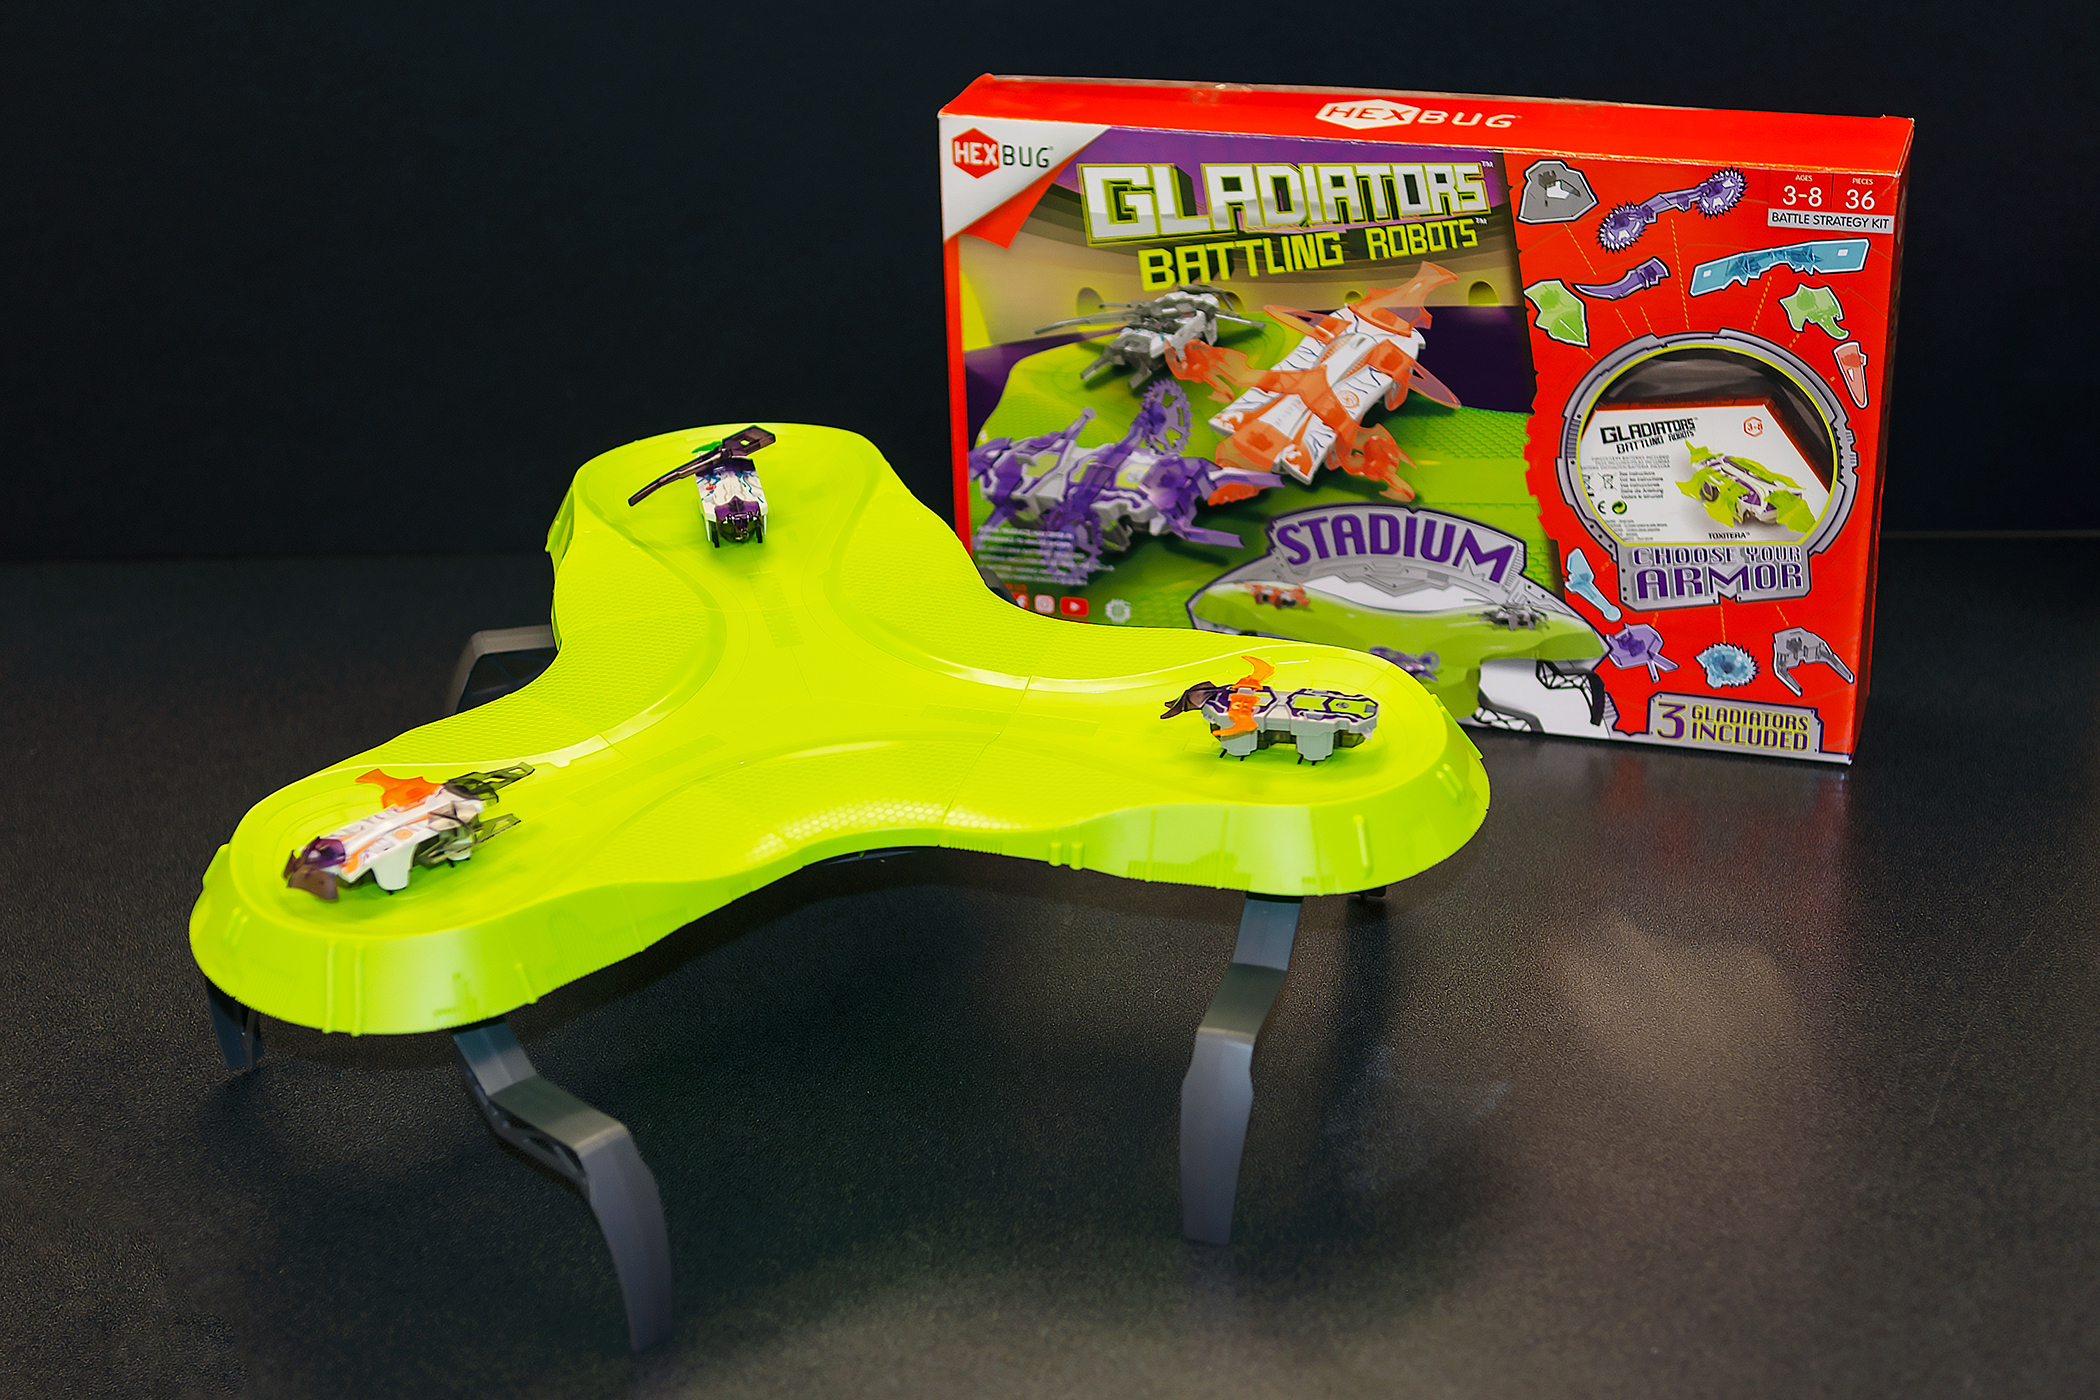 Coming in third place is the HexBug Gladiator.